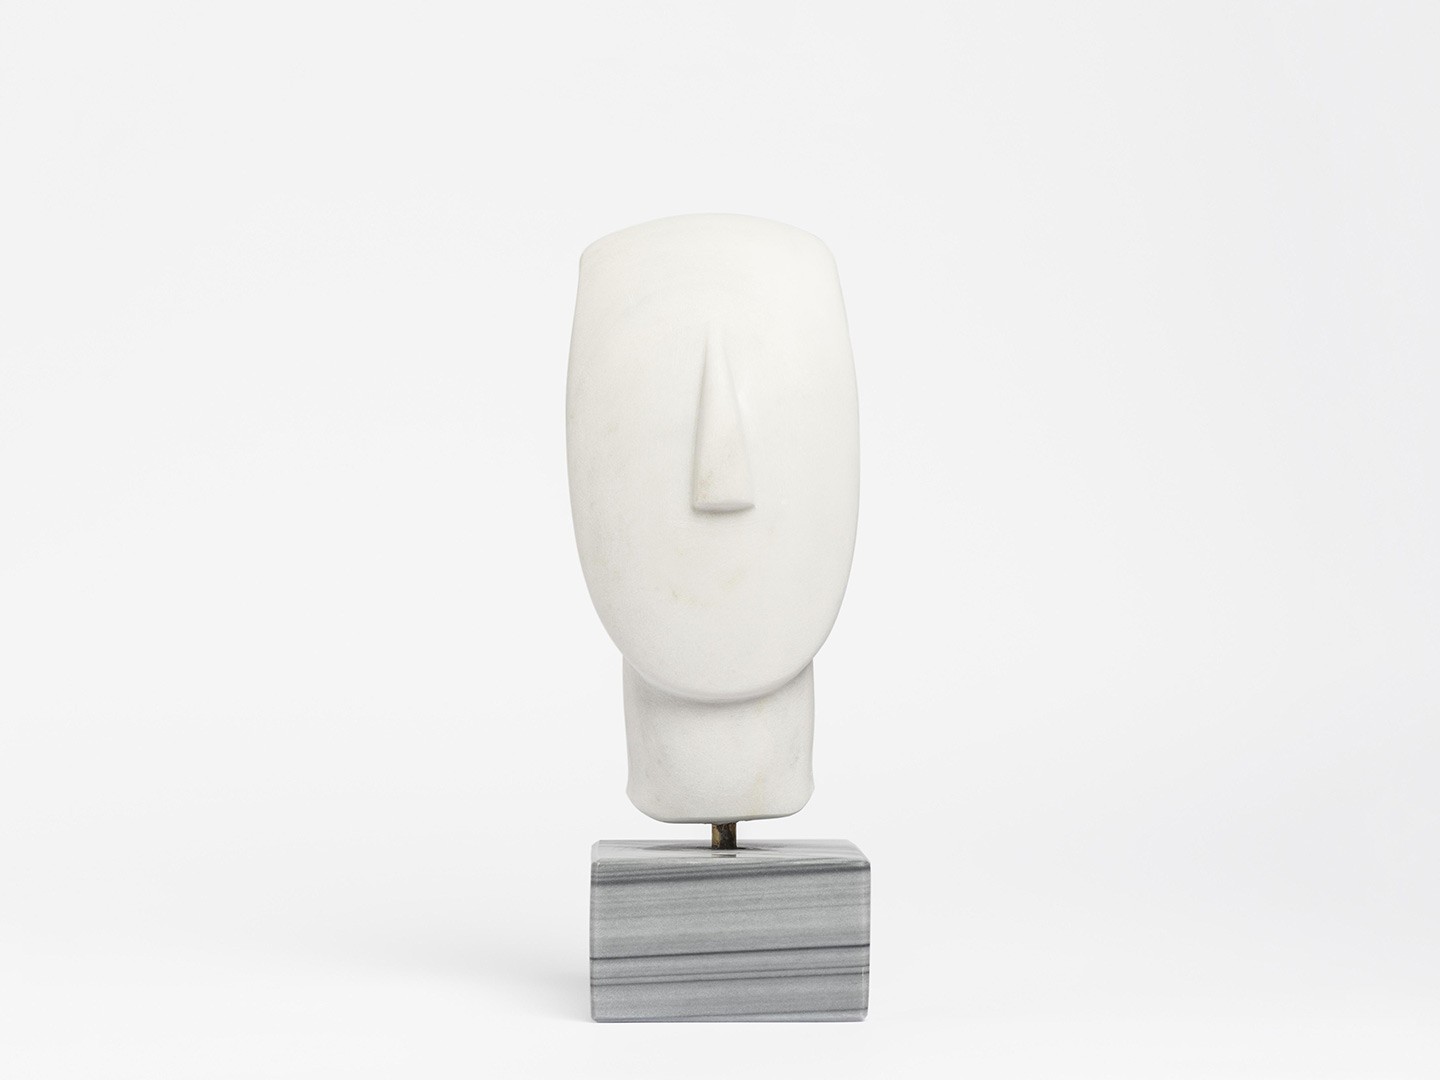 Head of the marble female figurine of the ‘Folded arm’ type.